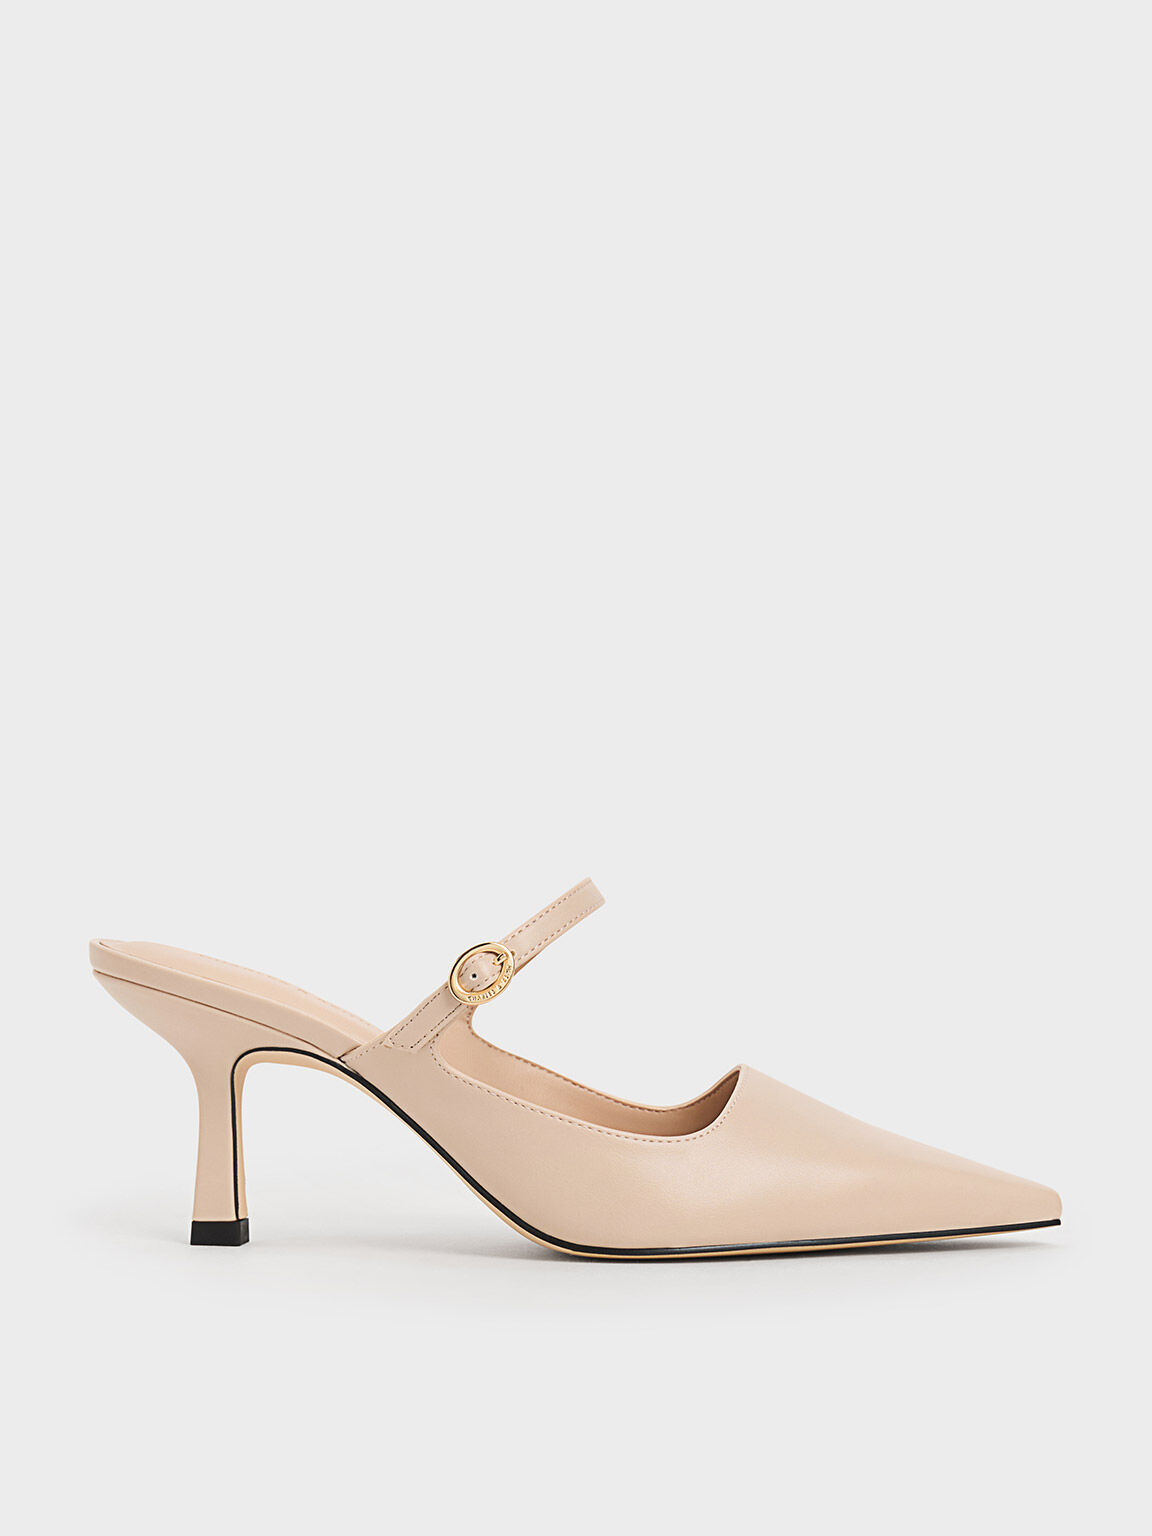 Nude Buckle-Strap Heeled Mules - CHARLES & KEITH US